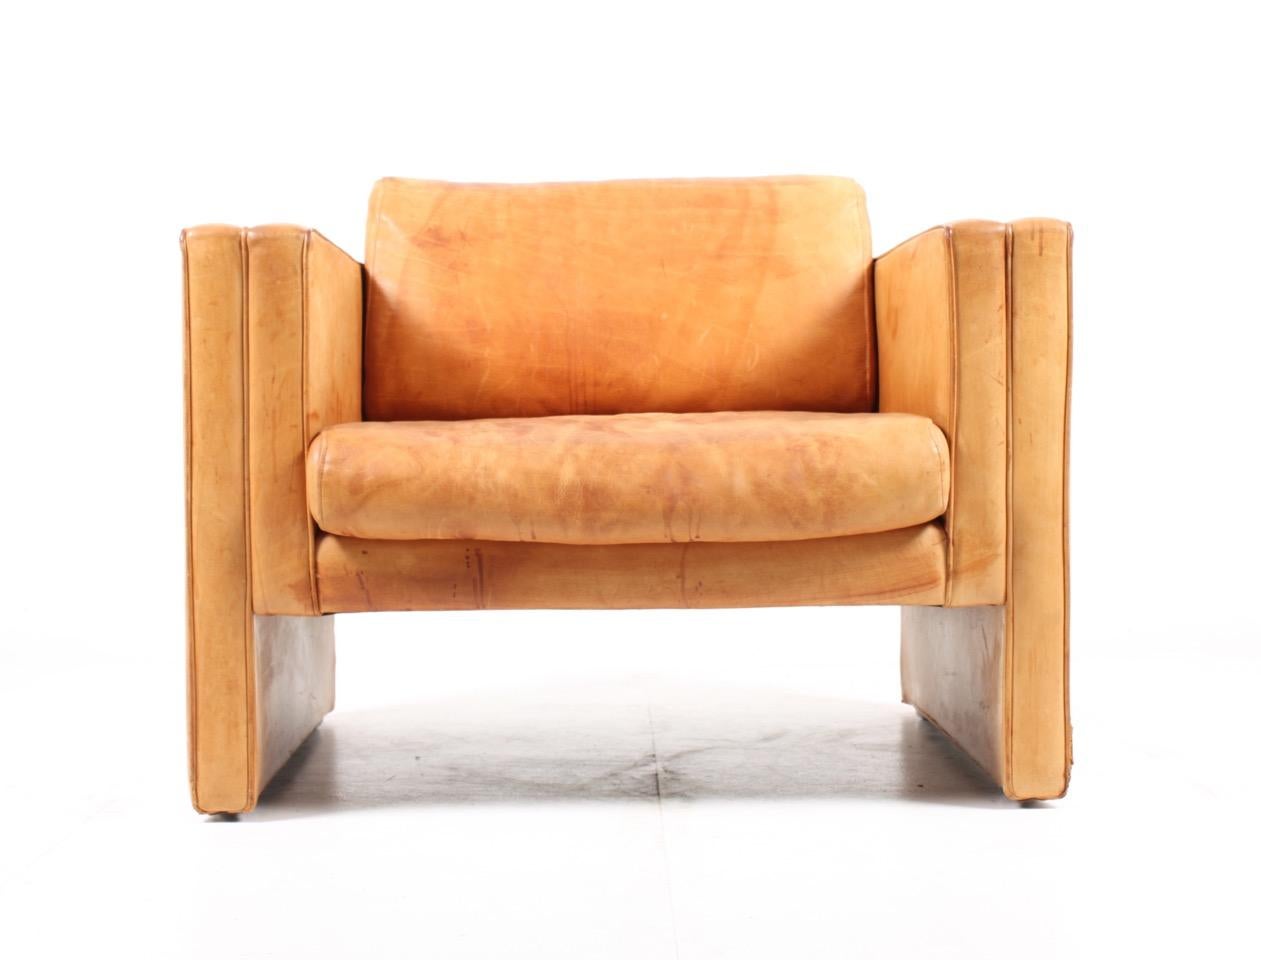 Comfortable lounge chair patinated tan leather by Knoll. Great original condition.